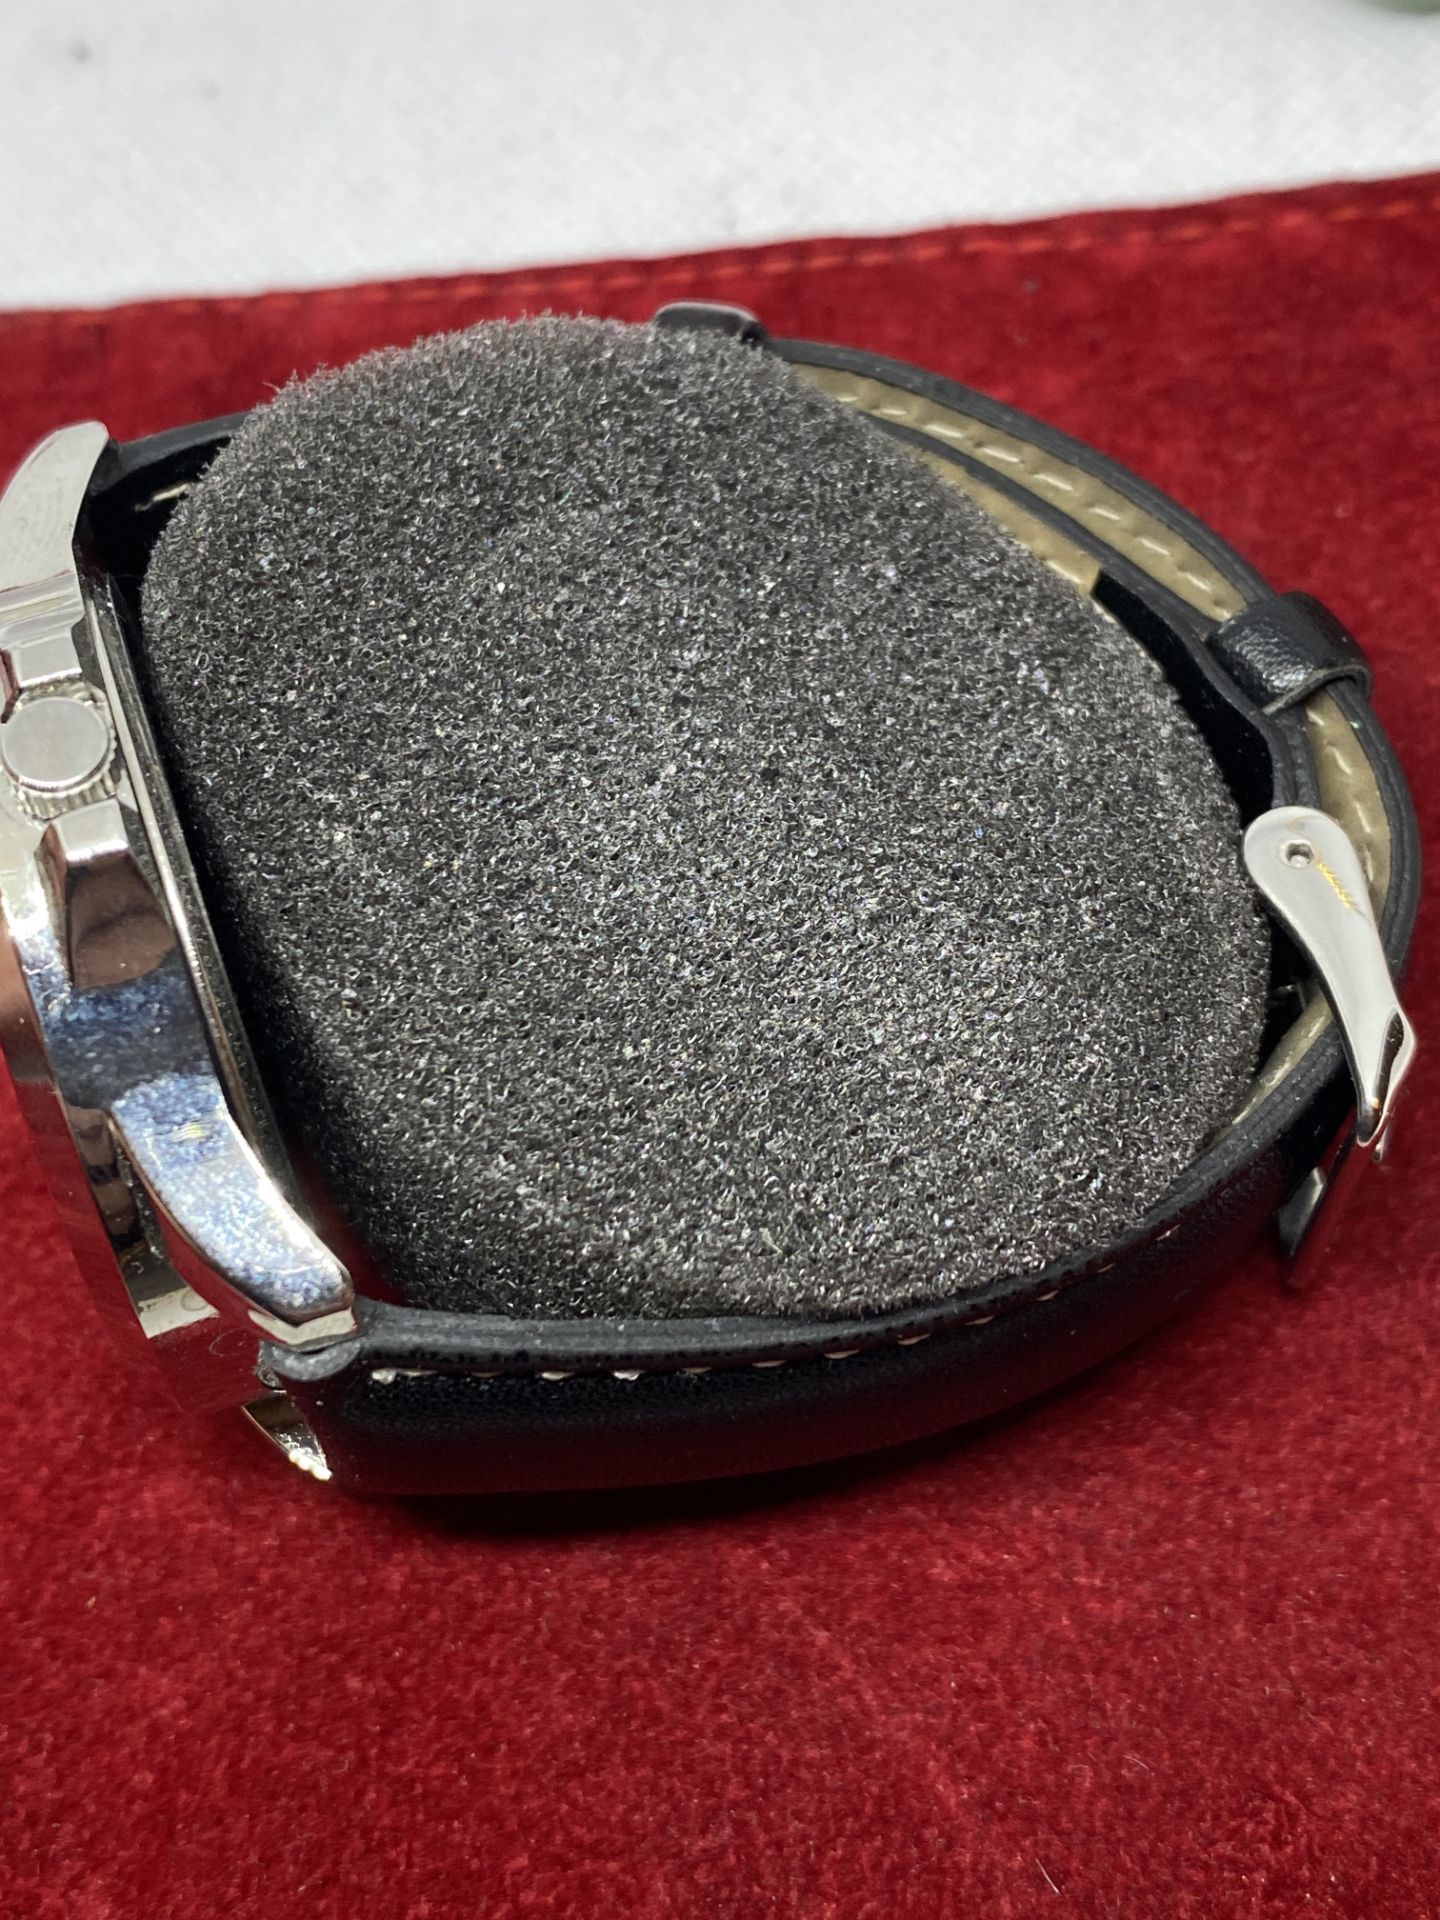 MICKEY MOUSE WATCH IN TIN - NEEDS BATTERY - Image 3 of 4